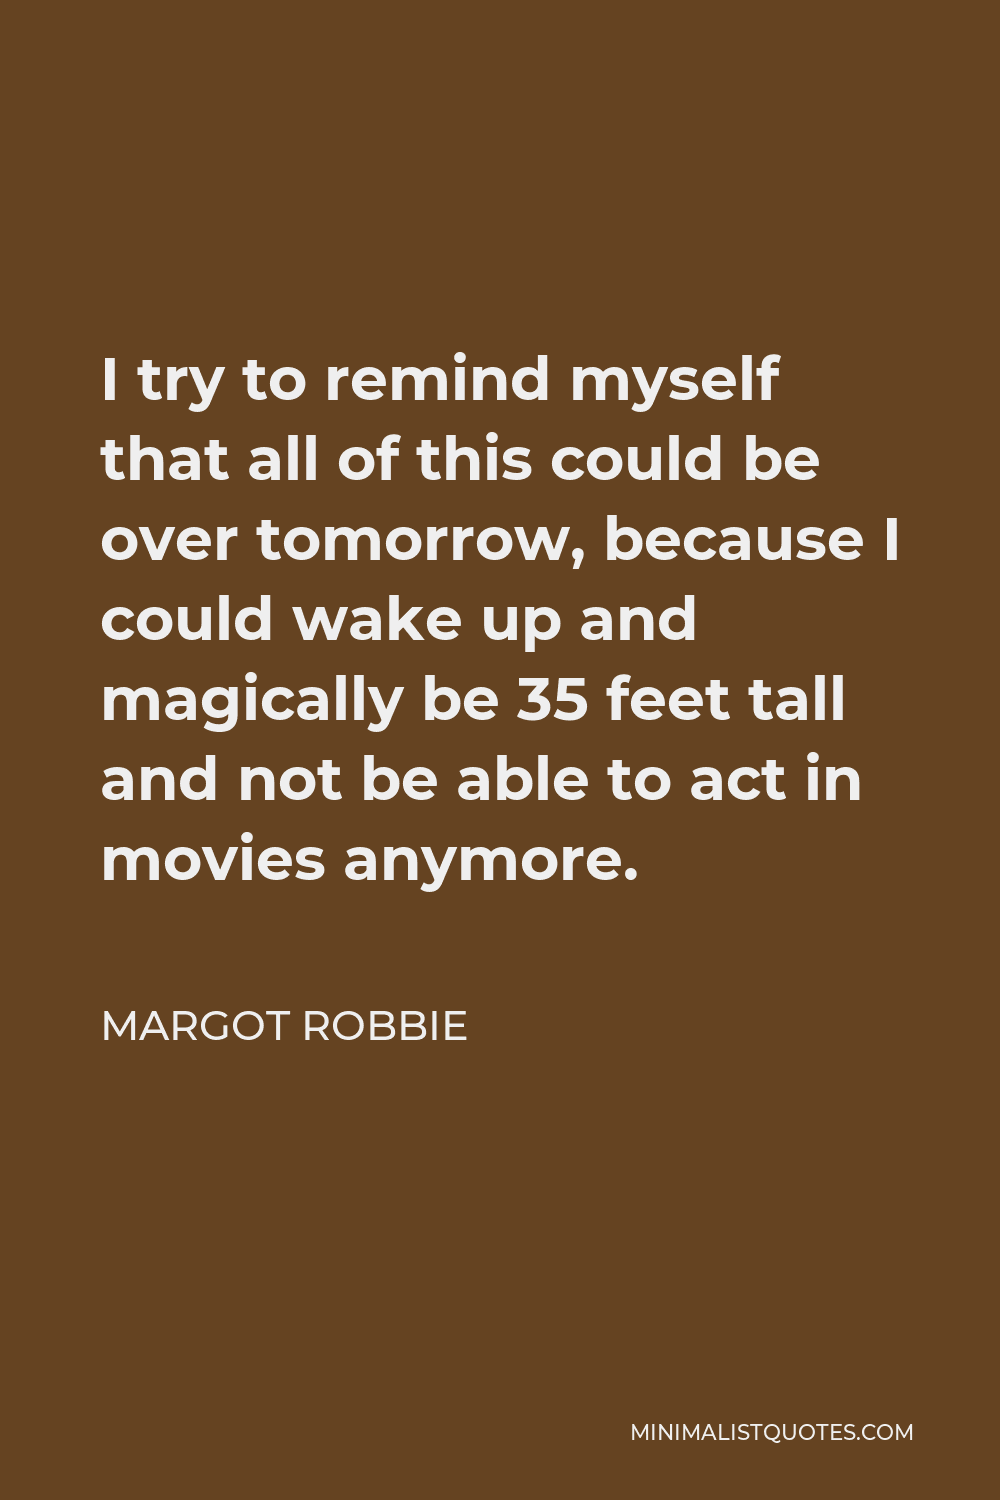 Margot Robbie Quote - I try to remind myself that all of this could be over tomorrow, because I could wake up and magically be 35 feet tall and not be able to act in movies anymore.